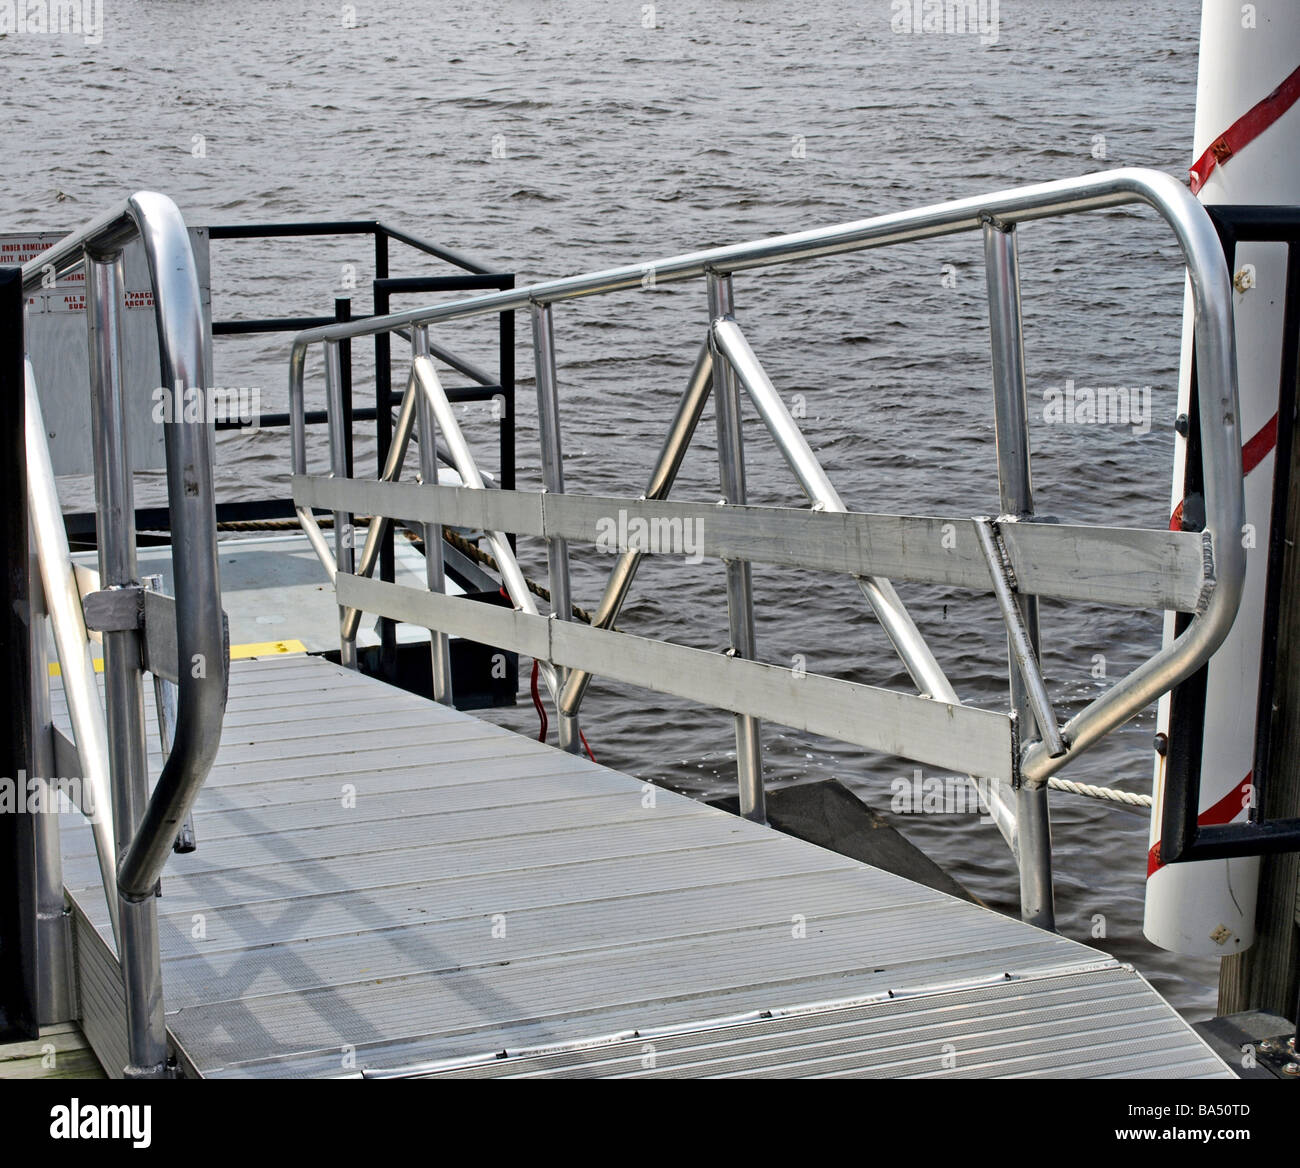 passenger boat ramp for ship on river, silver with metal walkway